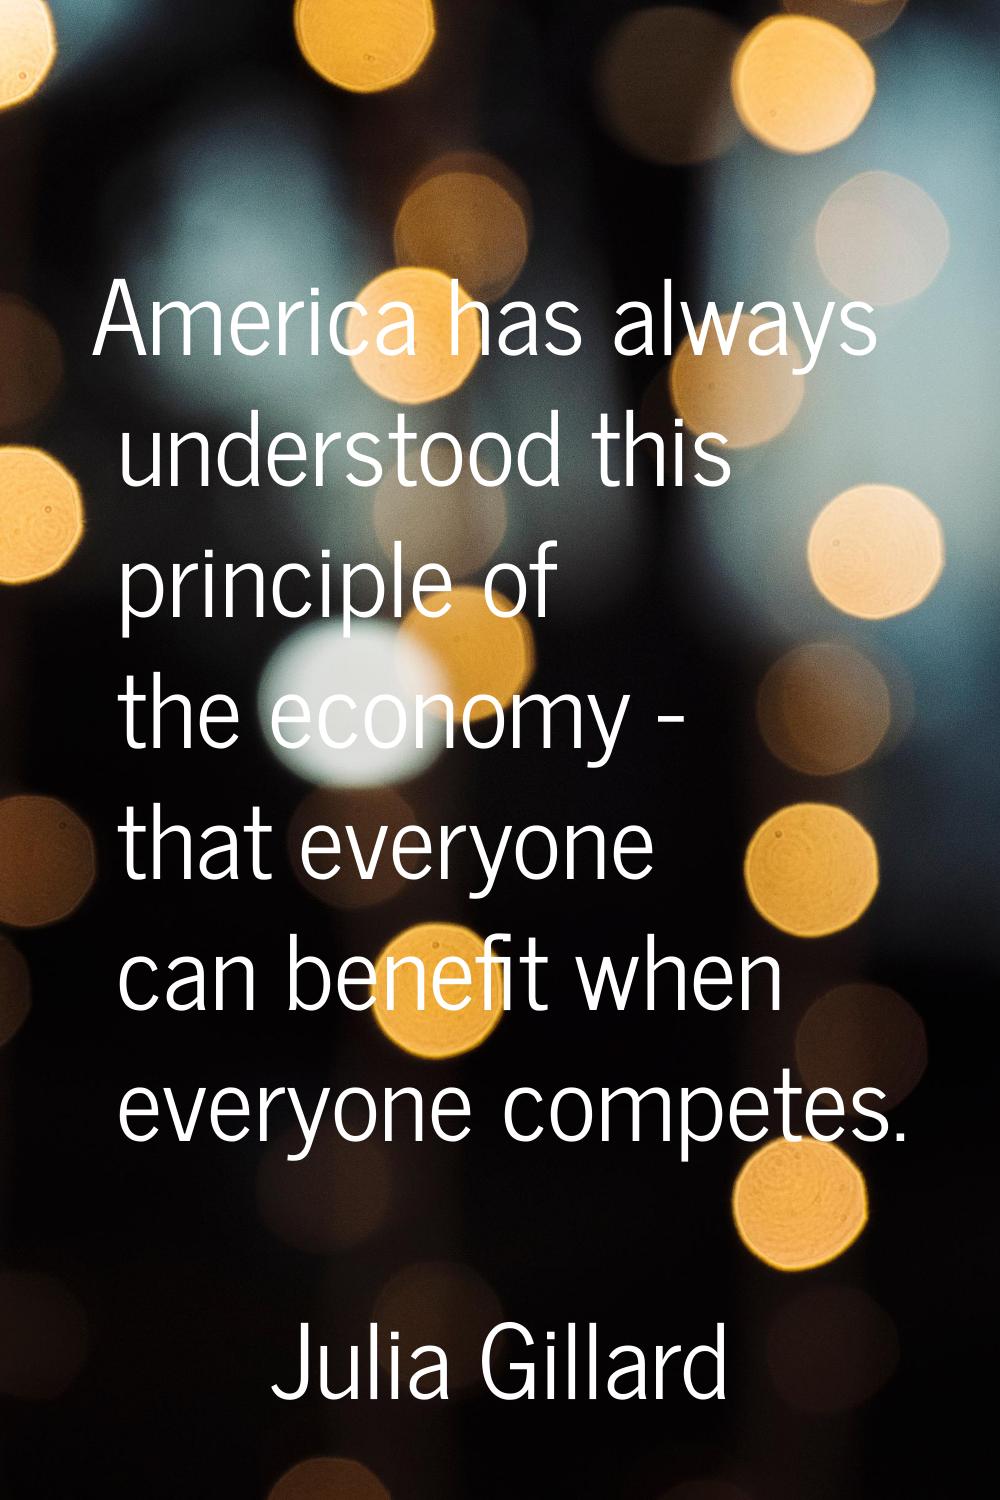 America has always understood this principle of the economy - that everyone can benefit when everyo